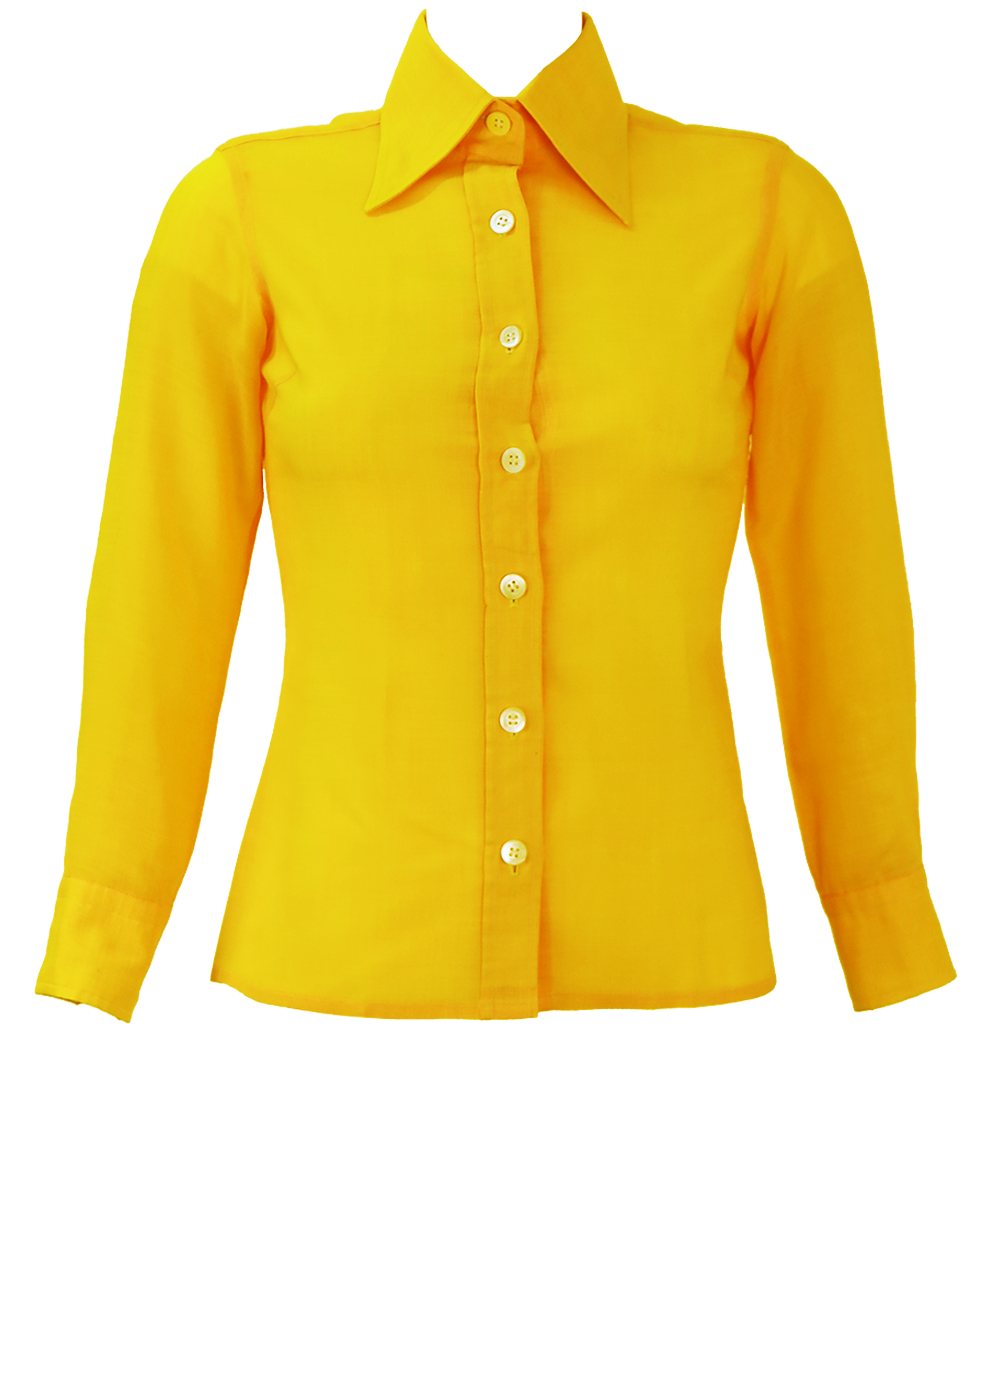 Vintage 60's Bright Yellow Shirt - S | Reign Vintage